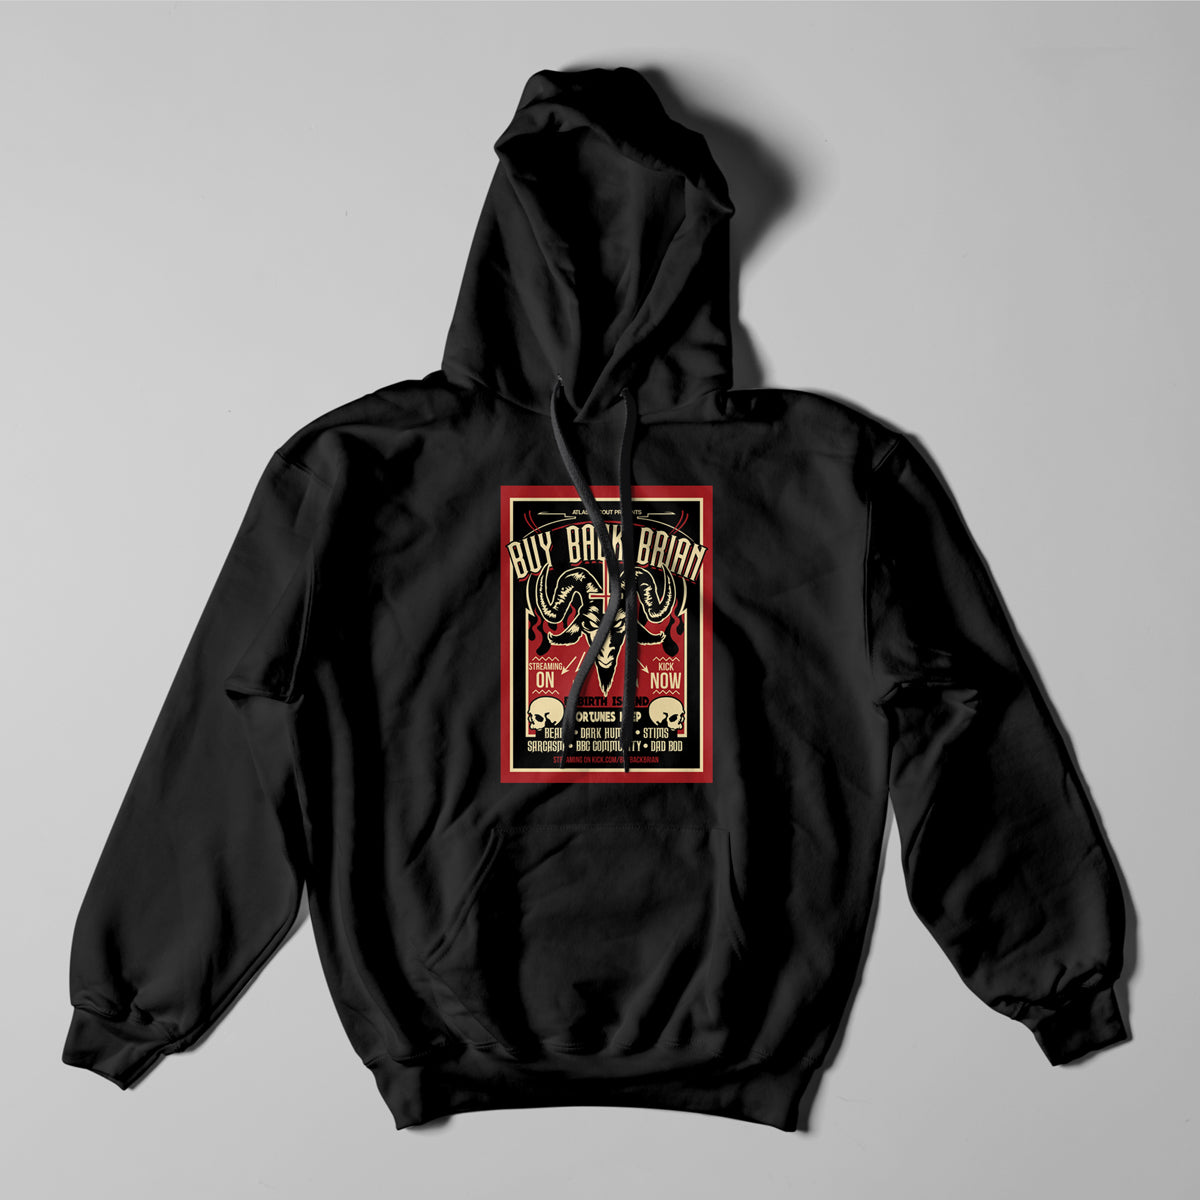 BBB - Goat show poster heavyweight pullover hoodie